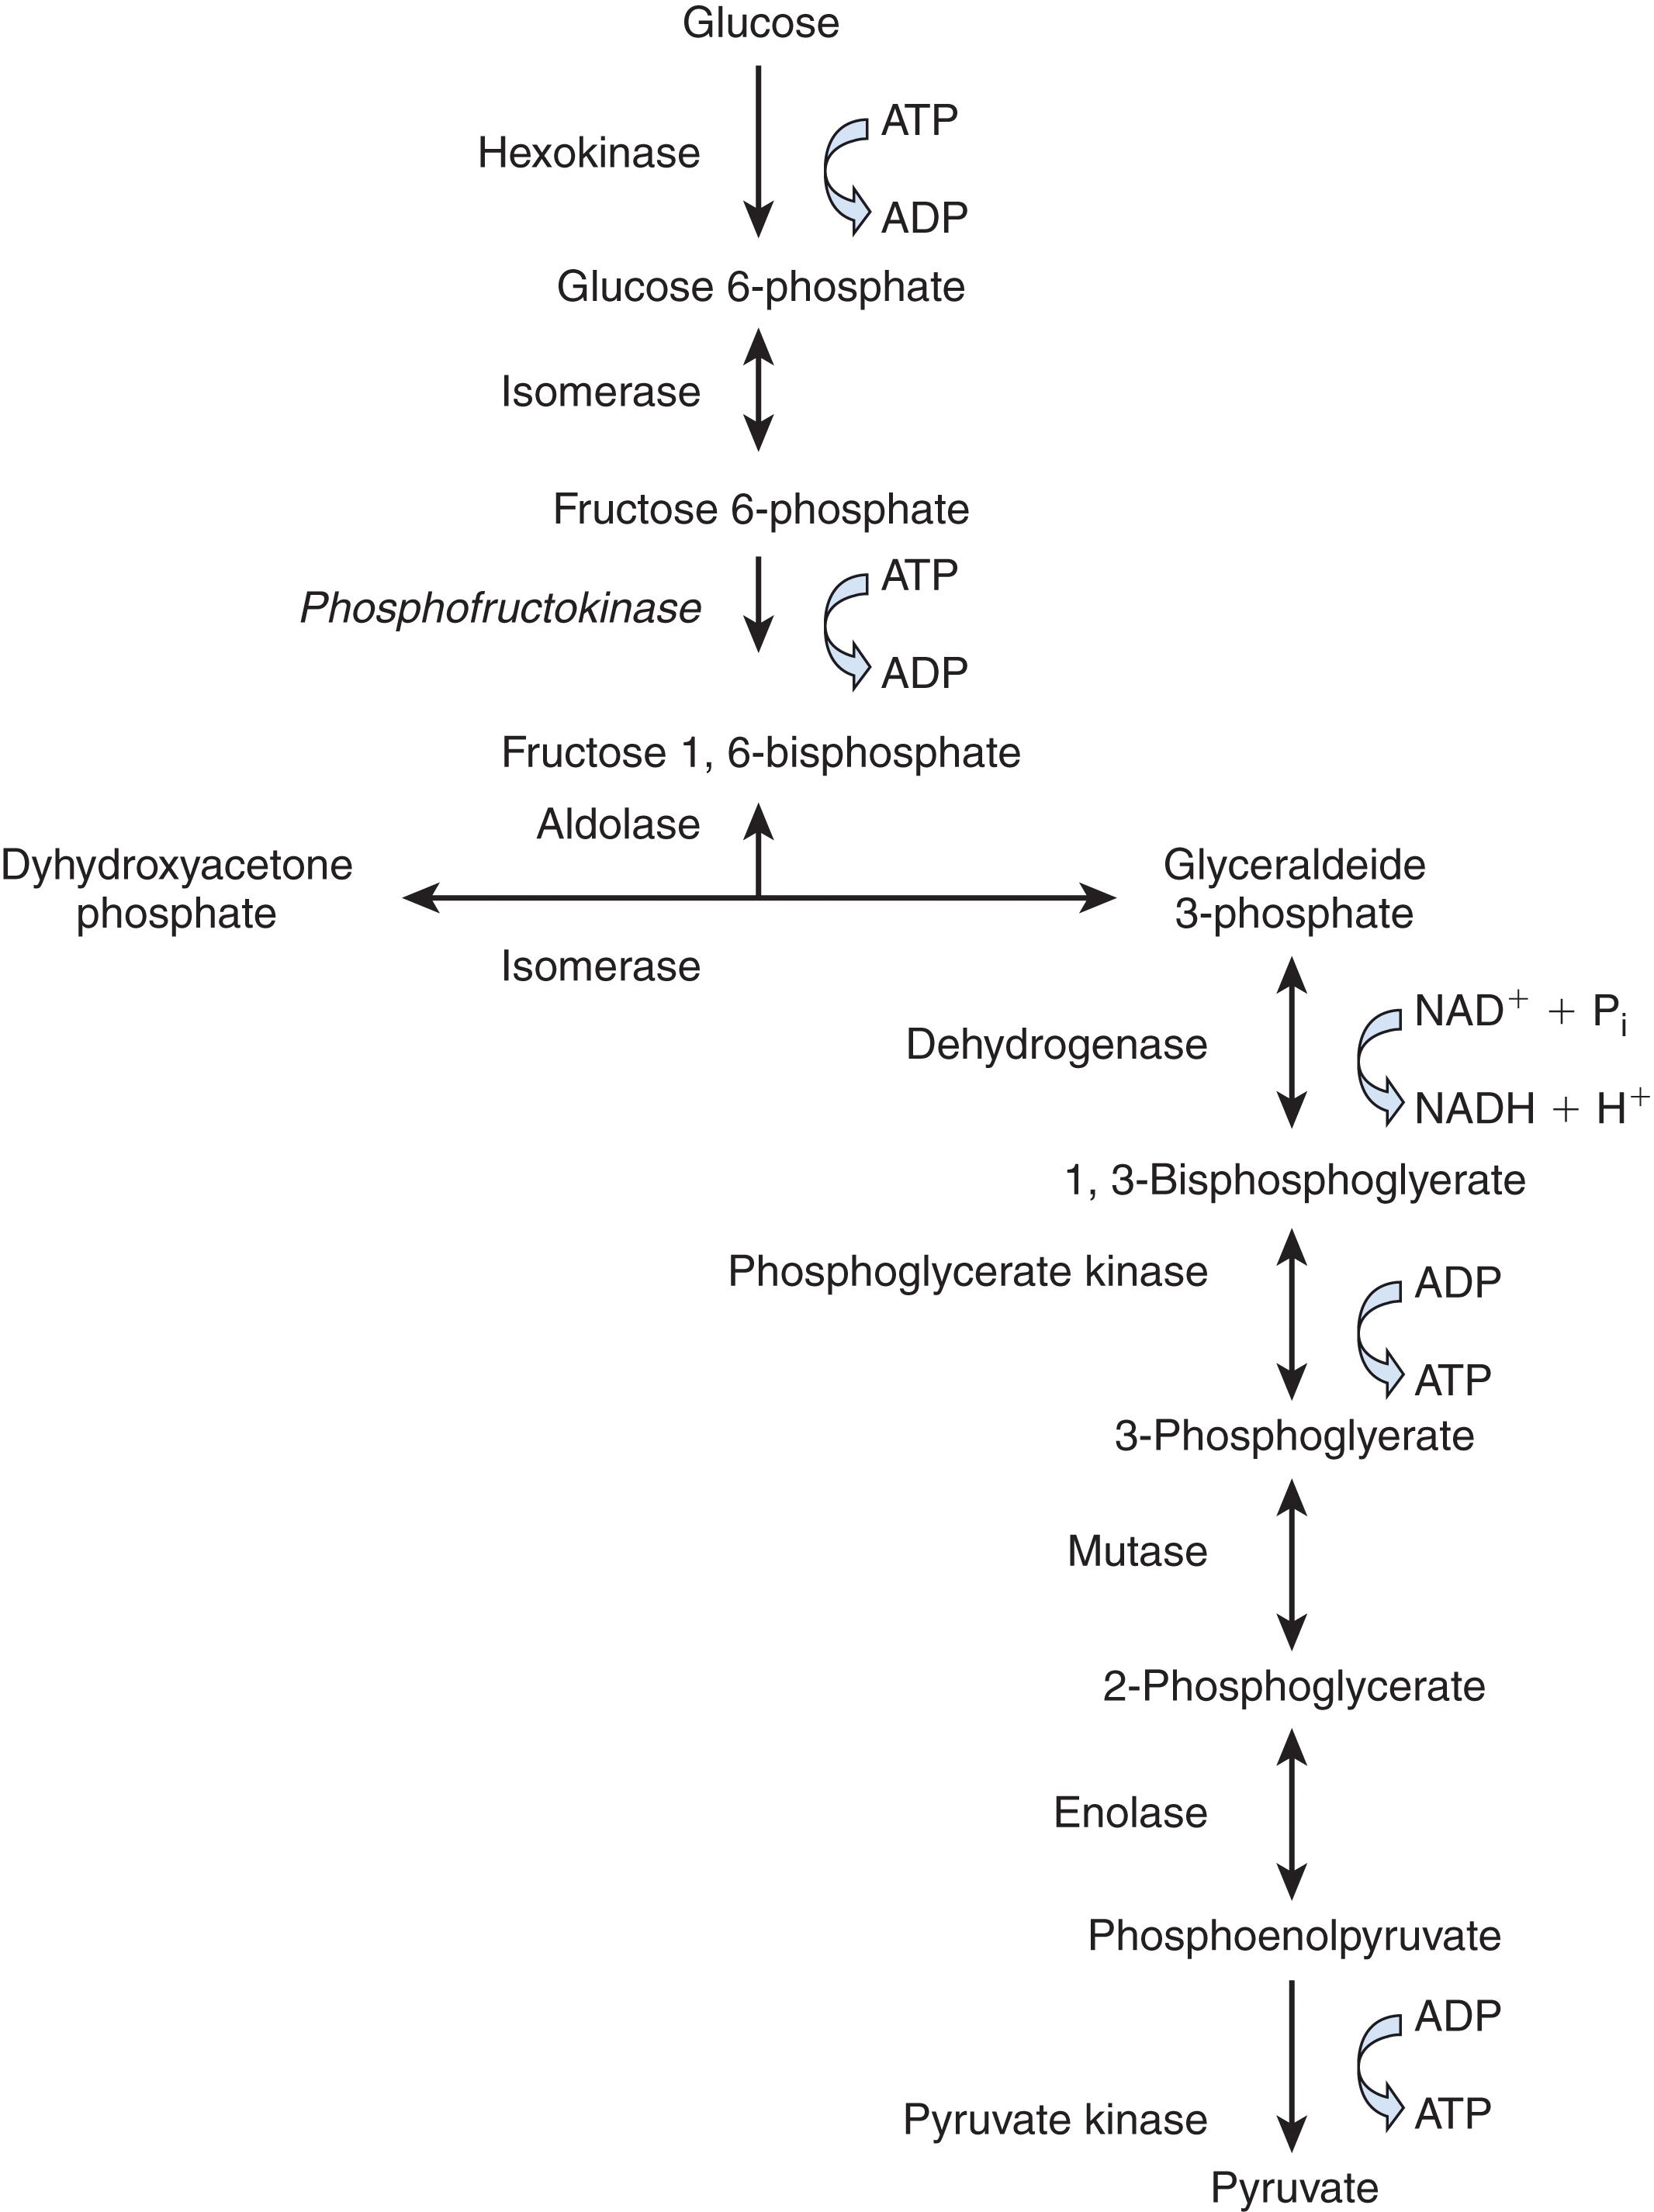 FIGURE 1, Steps of anaerobic glycolysis. The three rate-limiting, energy-using steps include the transition of glucose to glucose-6-phosphate controlled by the glucose hexokinase, the transition of fructose-6-phosphate to fructose-1-,6 biphosphate controlled by the phosphofructokinase, the pacemaker of the anerobic glycolysis, and the transition phosphoenolpyruvate to pyruvate controlled by pyruvate kinase.